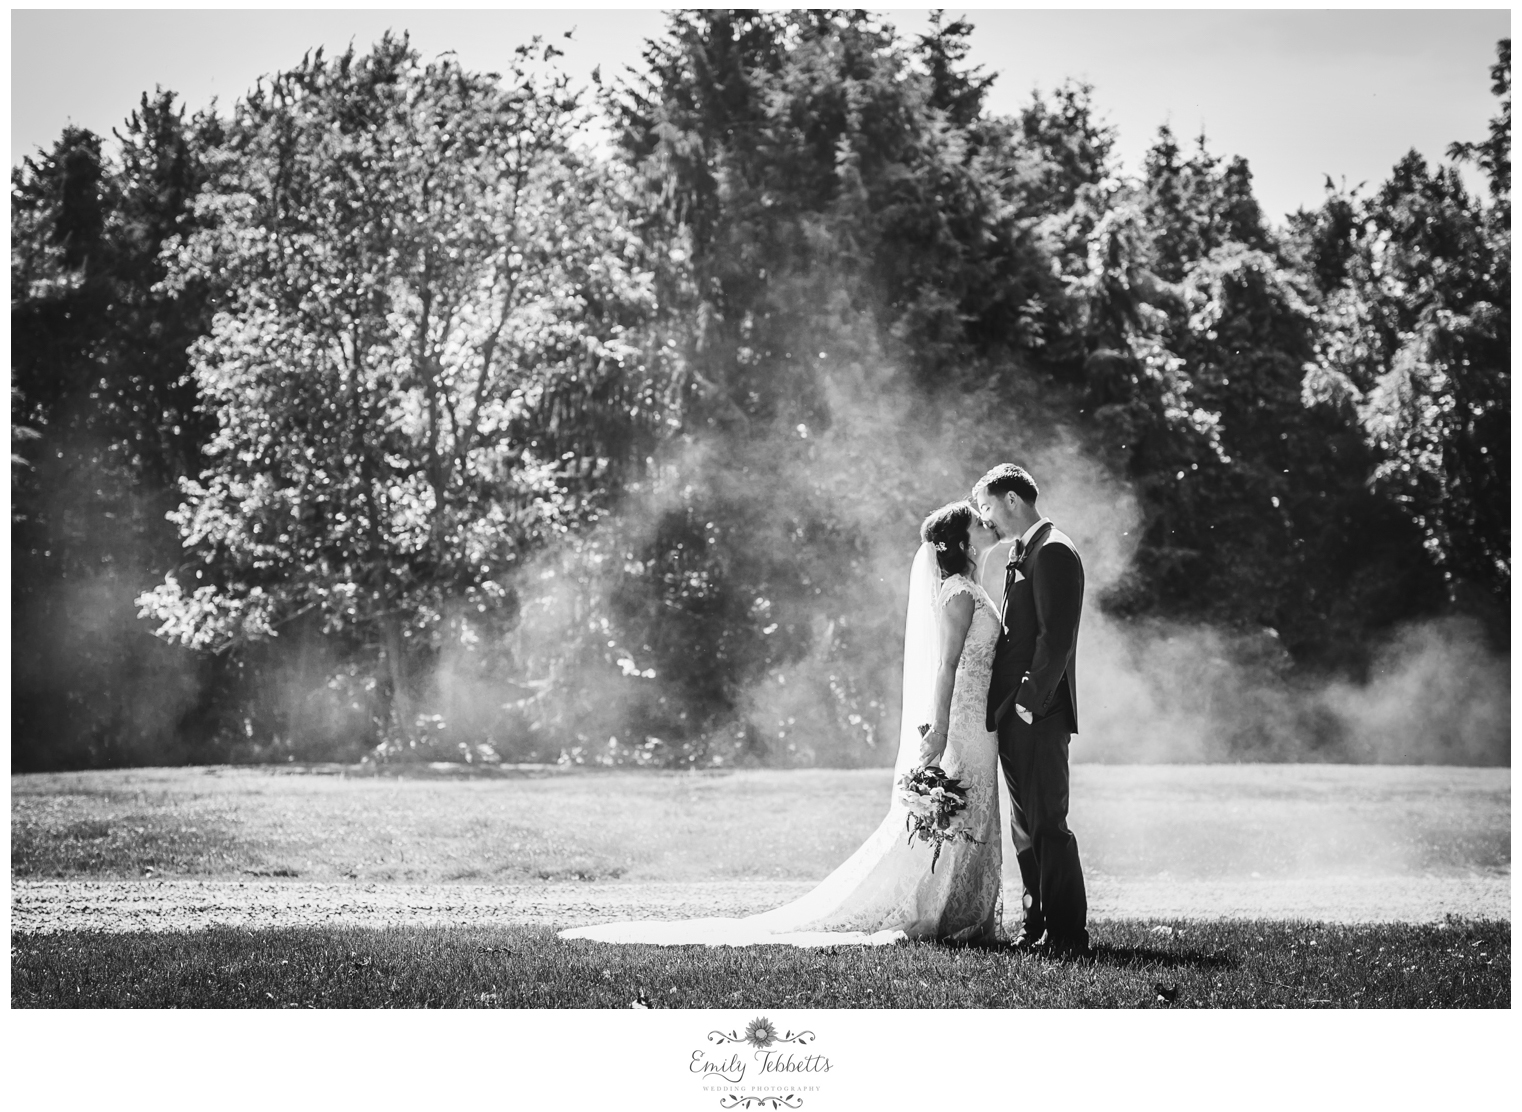 Emily Tebbetts Photography - webb barn wedding wethersfield ct connecticut rustic chic wedding first look fathers day emotional -3.jpg